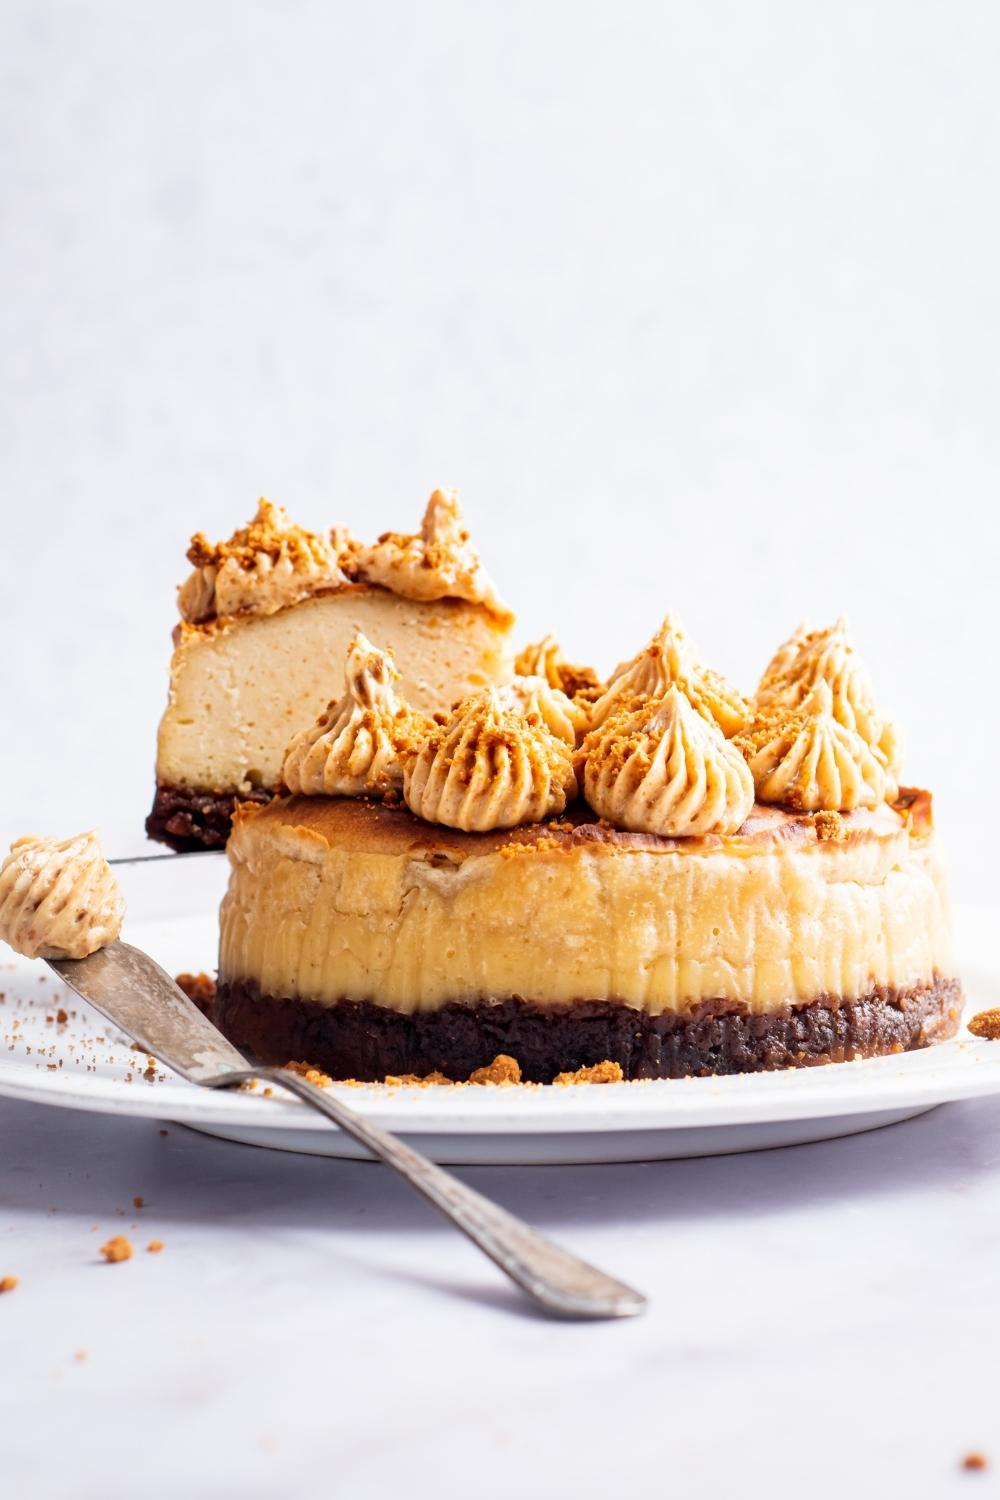 A side view of a Biscoff cheesecake with dolloped frosting on top sprinkled with crumbled lotus Biscoff cookies. A serving spatula is removing a slice of biscoff cheesecake.